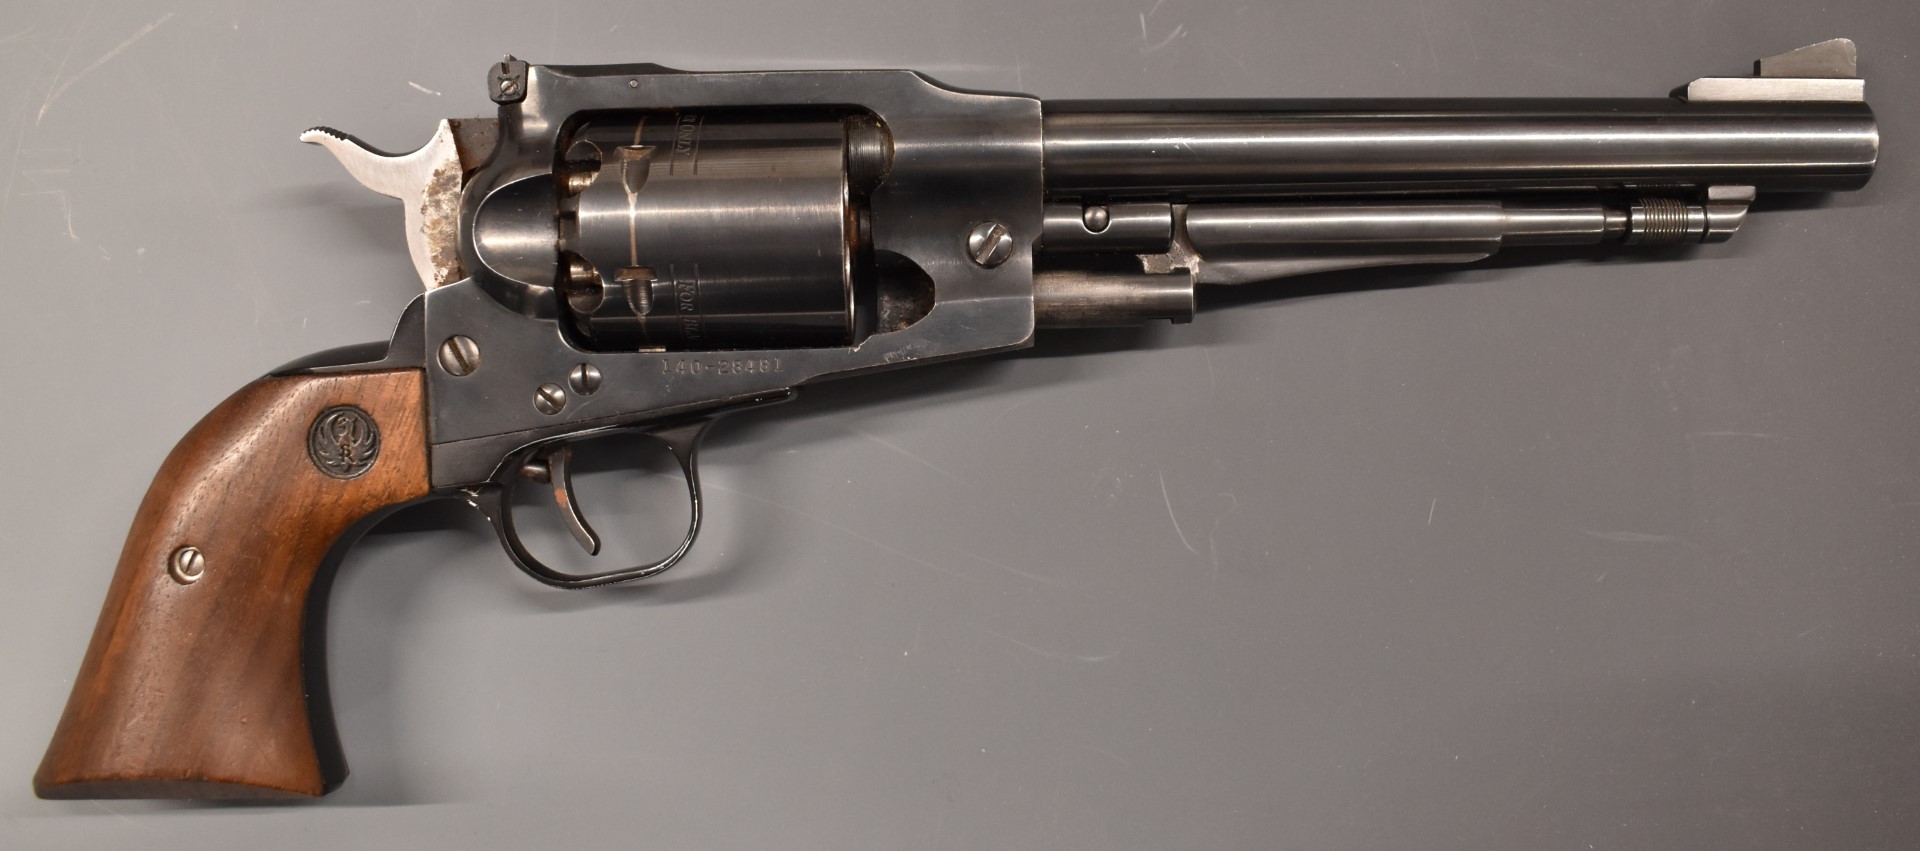 Ruger Old Army .44 six-shot single action revolver with shaped wooden grips, adjustable sights